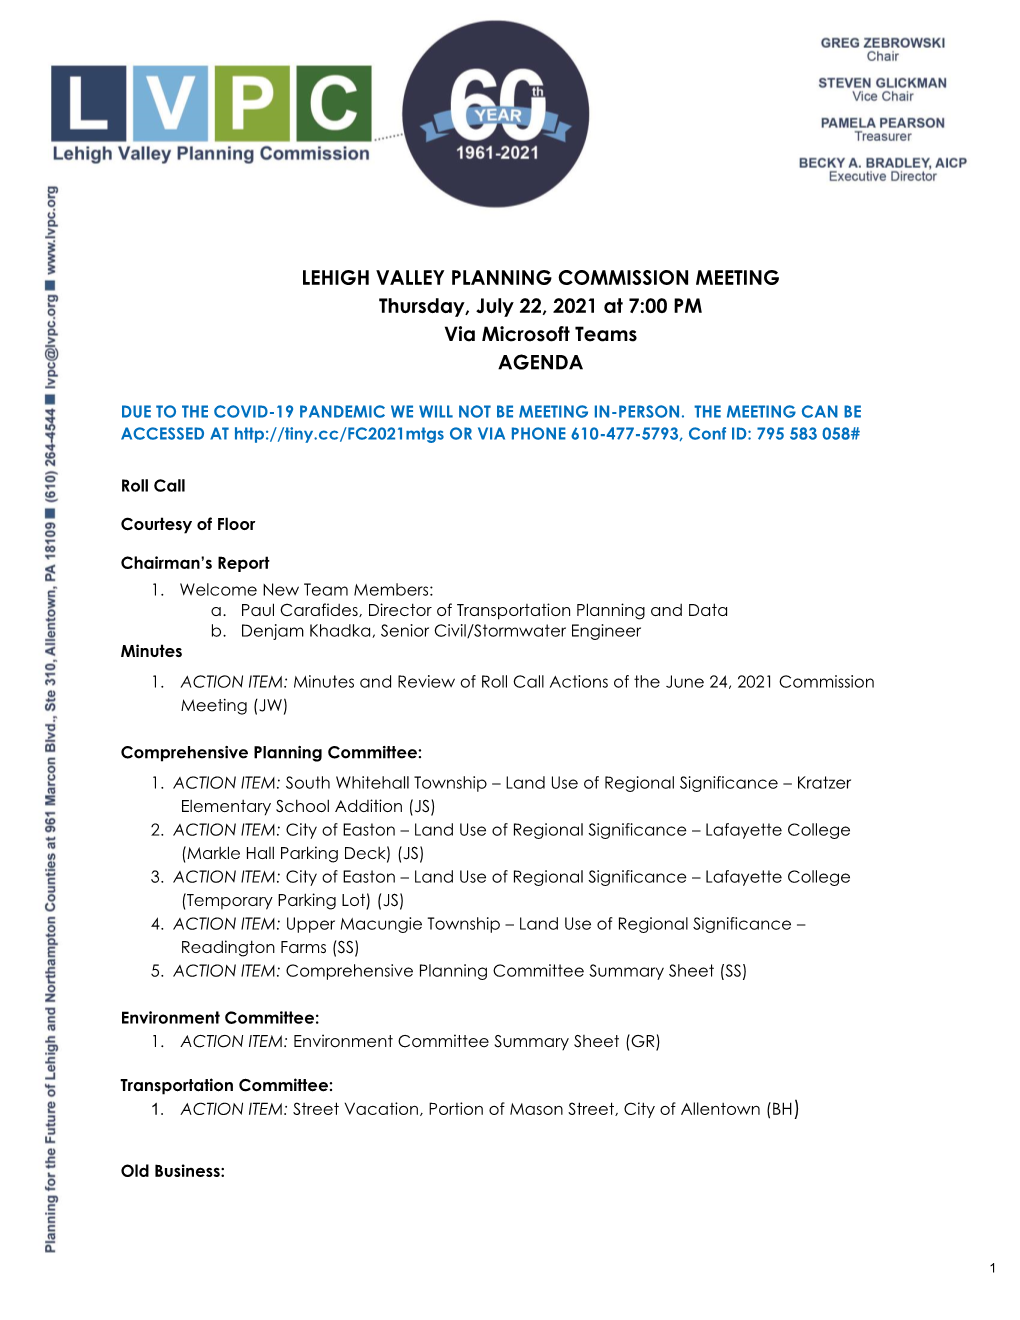 LEHIGH VALLEY PLANNING COMMISSION MEETING Thursday, July 22, 2021 at 7:00 PM Via Microsoft Teams AGENDA